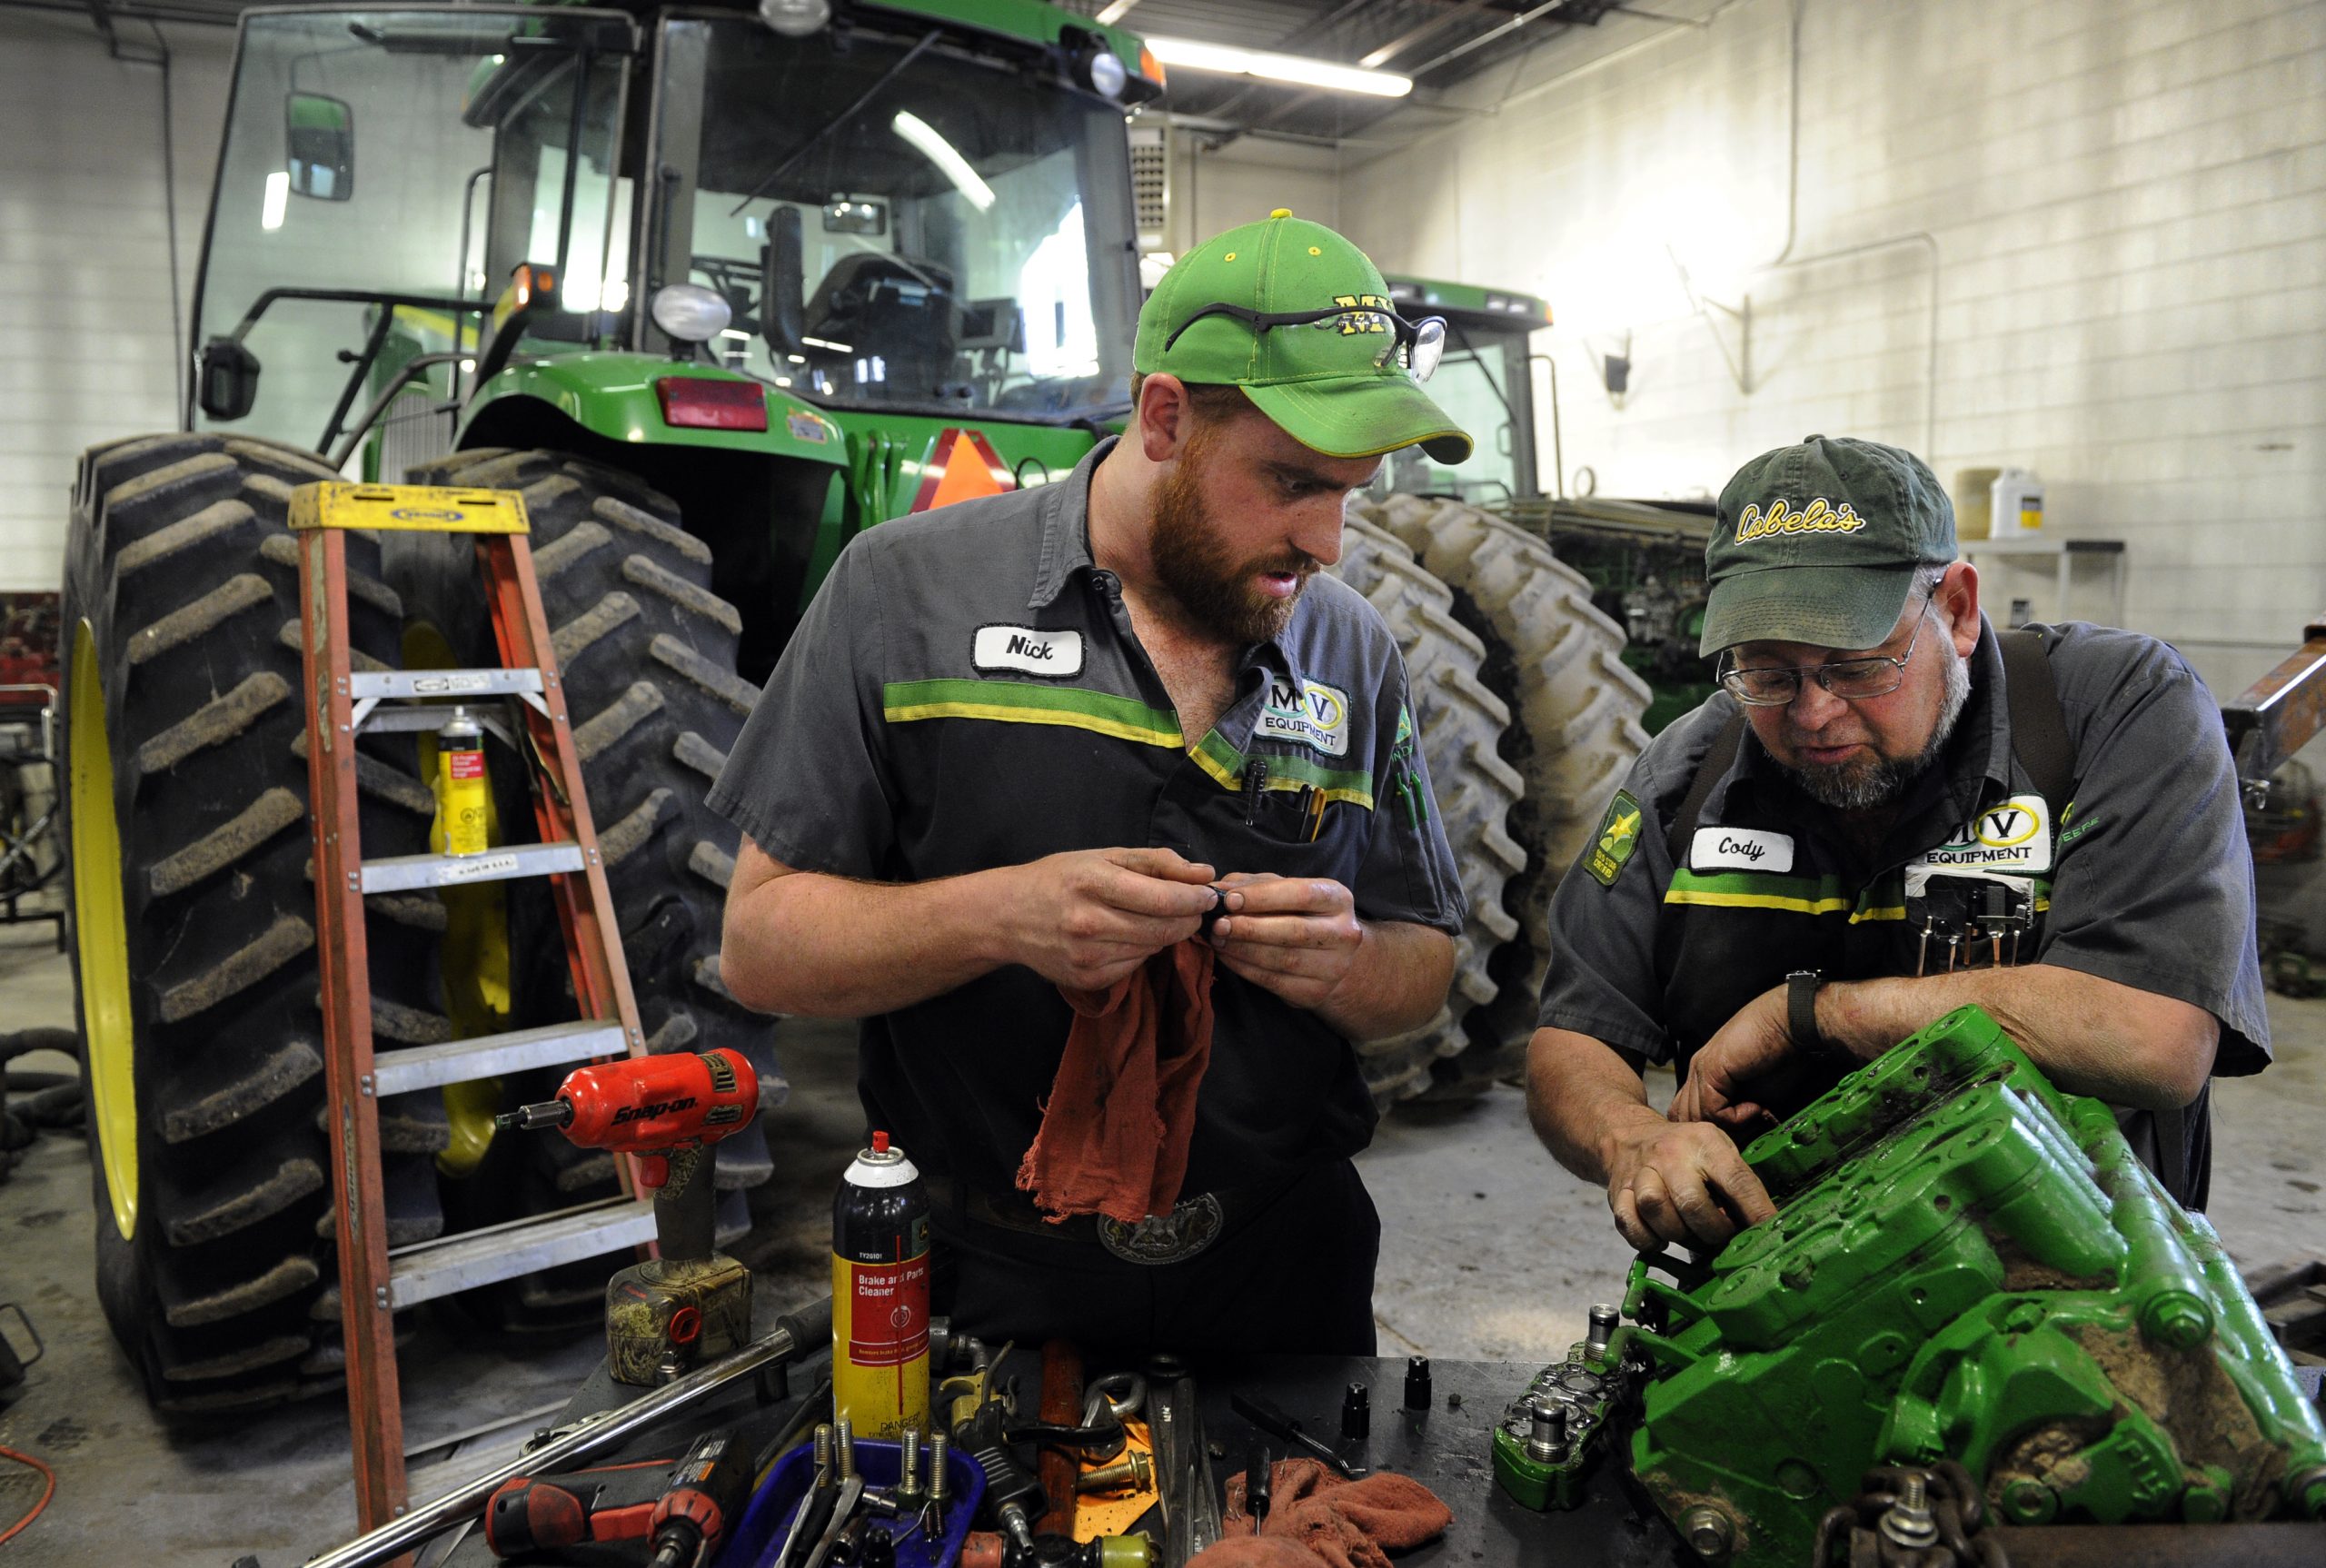 Master service tech/master mechanic for MV Equipment in Sterling Colorado, Cody Craven, right, works with service tech., Nick Anderson, left, working a repair a SCV stack on a John Deere 8320 tractor Tuesday afternoon, February 28th, 2012. Andy Cross, The